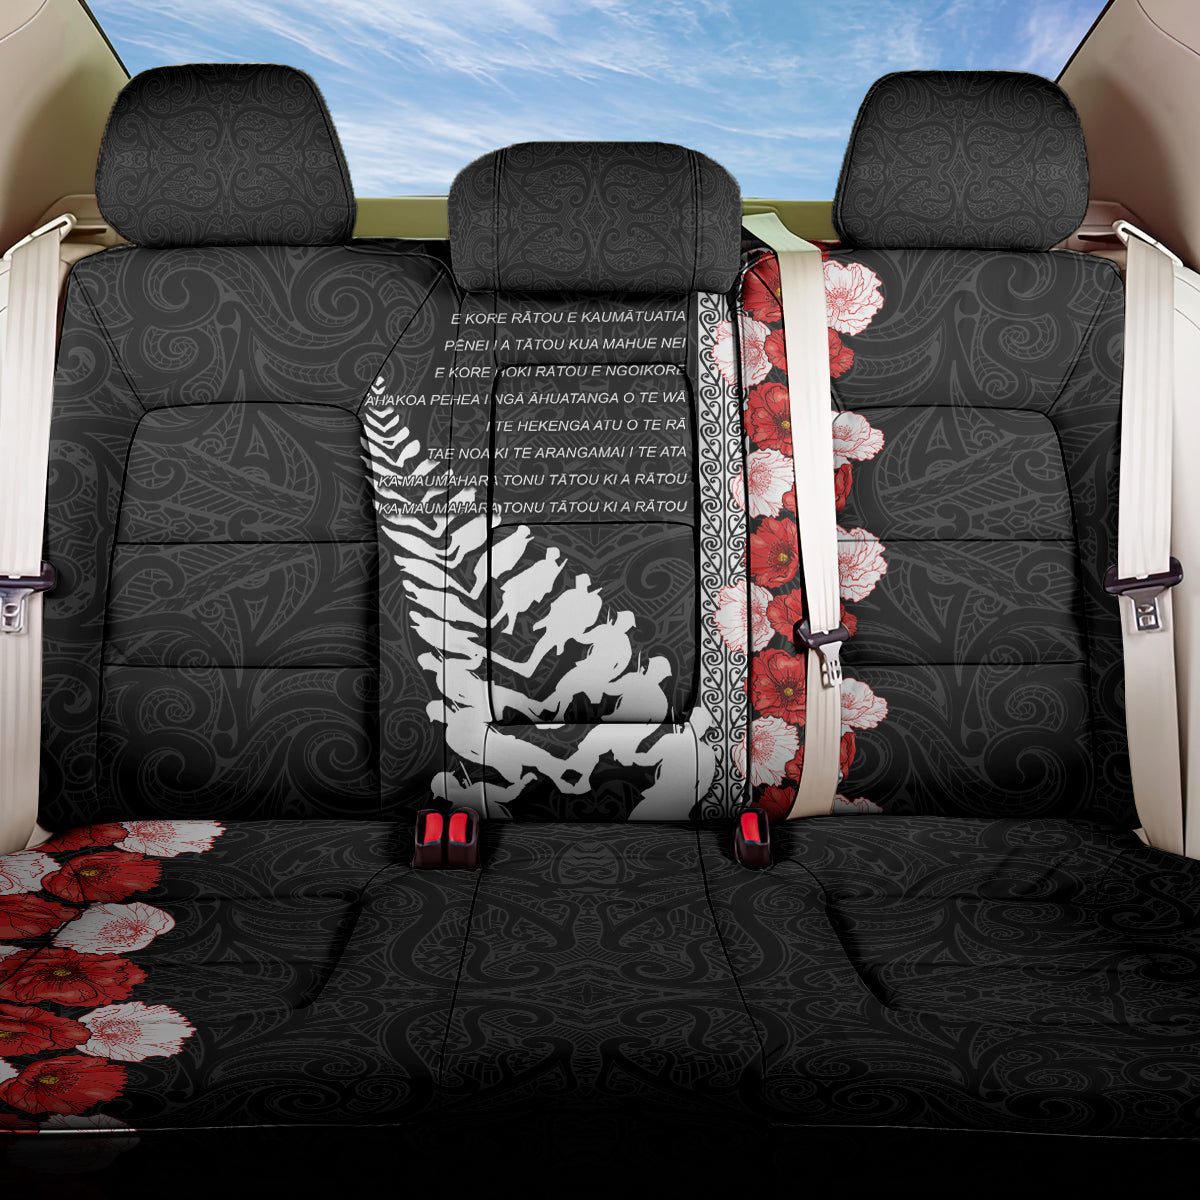 New Zealand ANZAC Day Back Car Seat Cover Soldier Silver Fern with Red Poppies Flower Maori Style LT03 One Size Black - Polynesian Pride